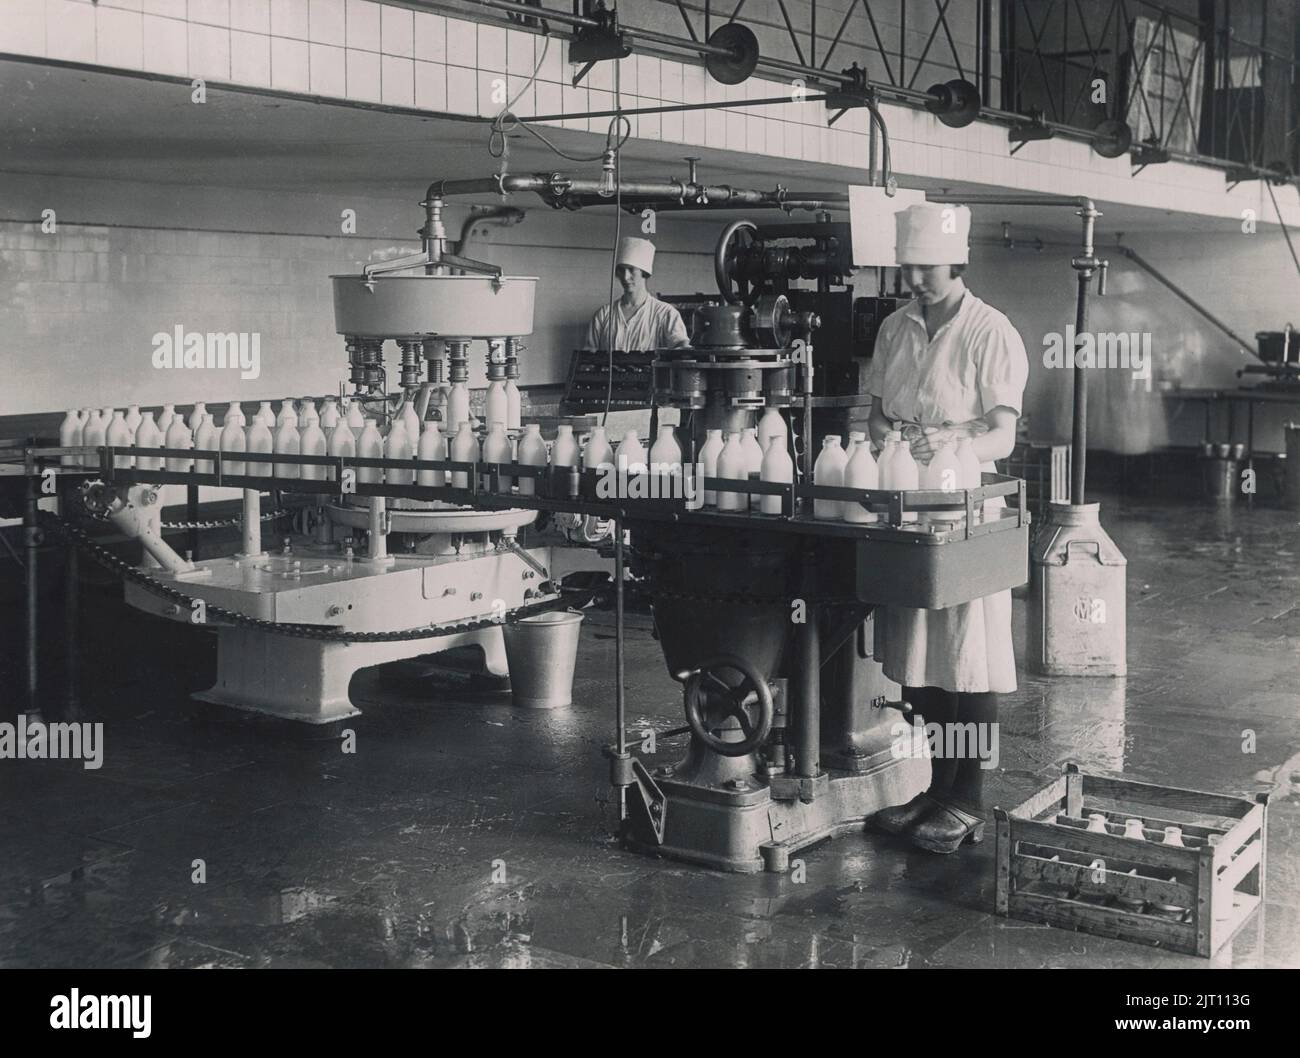 Dairy in the 1930s. An interior of Mjolkcentralen and it's filling station of milk bottles. An early semi-automated production line where empty bottles were filled and capped. The distribution of milk in glass bottles was disused in the 1950s in Sweden. Stock Photo